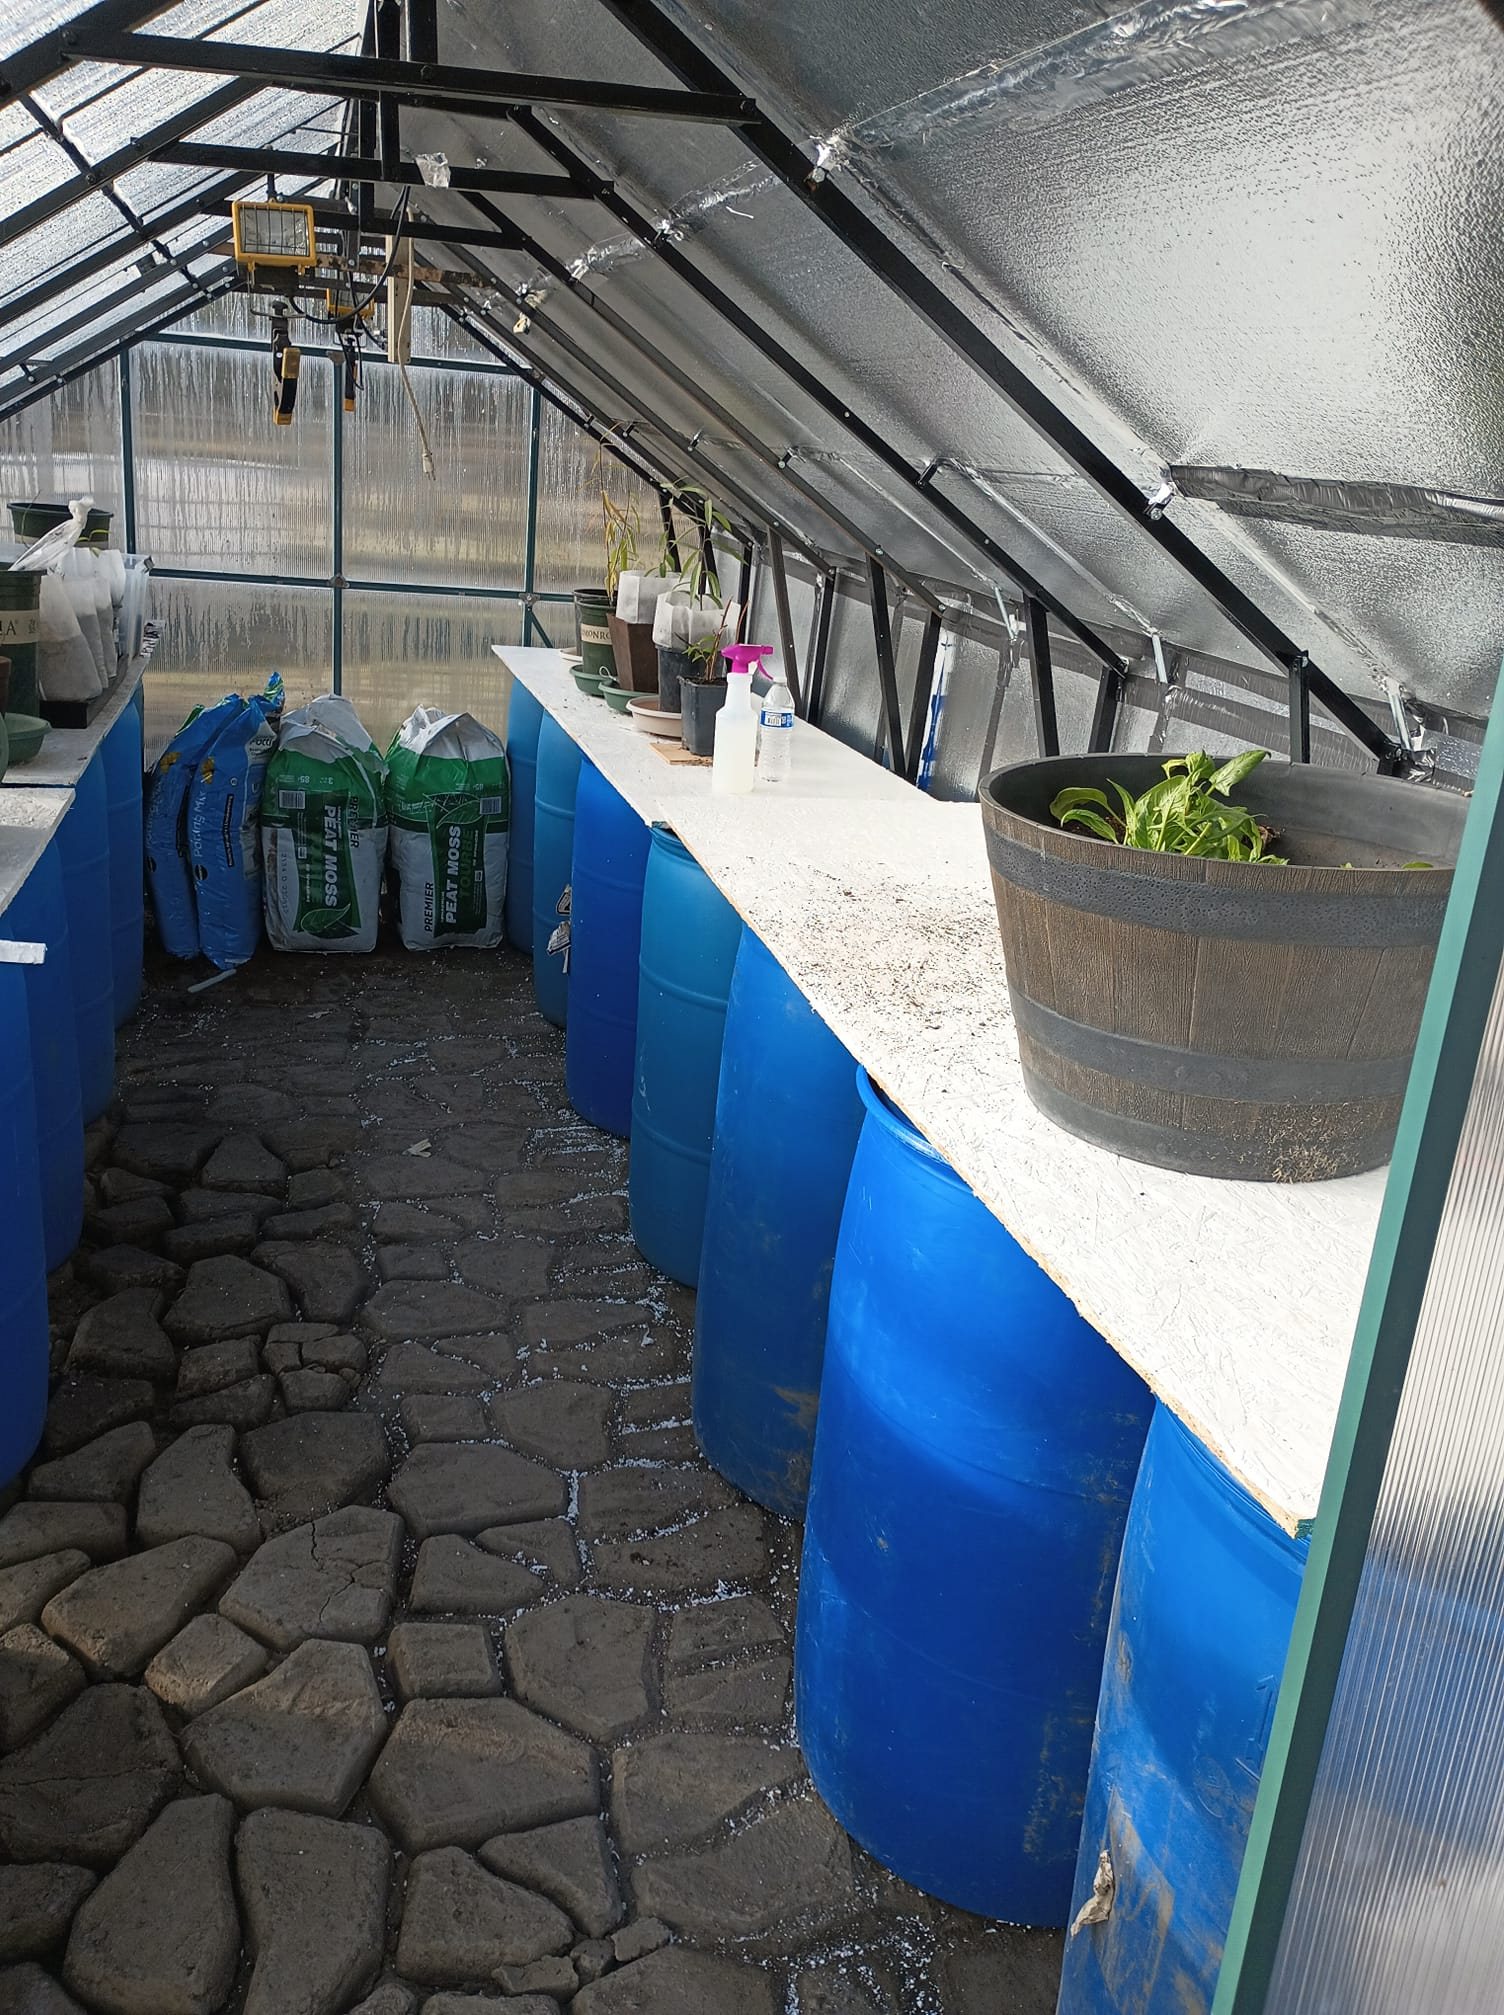 4 season Greenhouse in Freezing Conditions: Insights and Future Enhancements